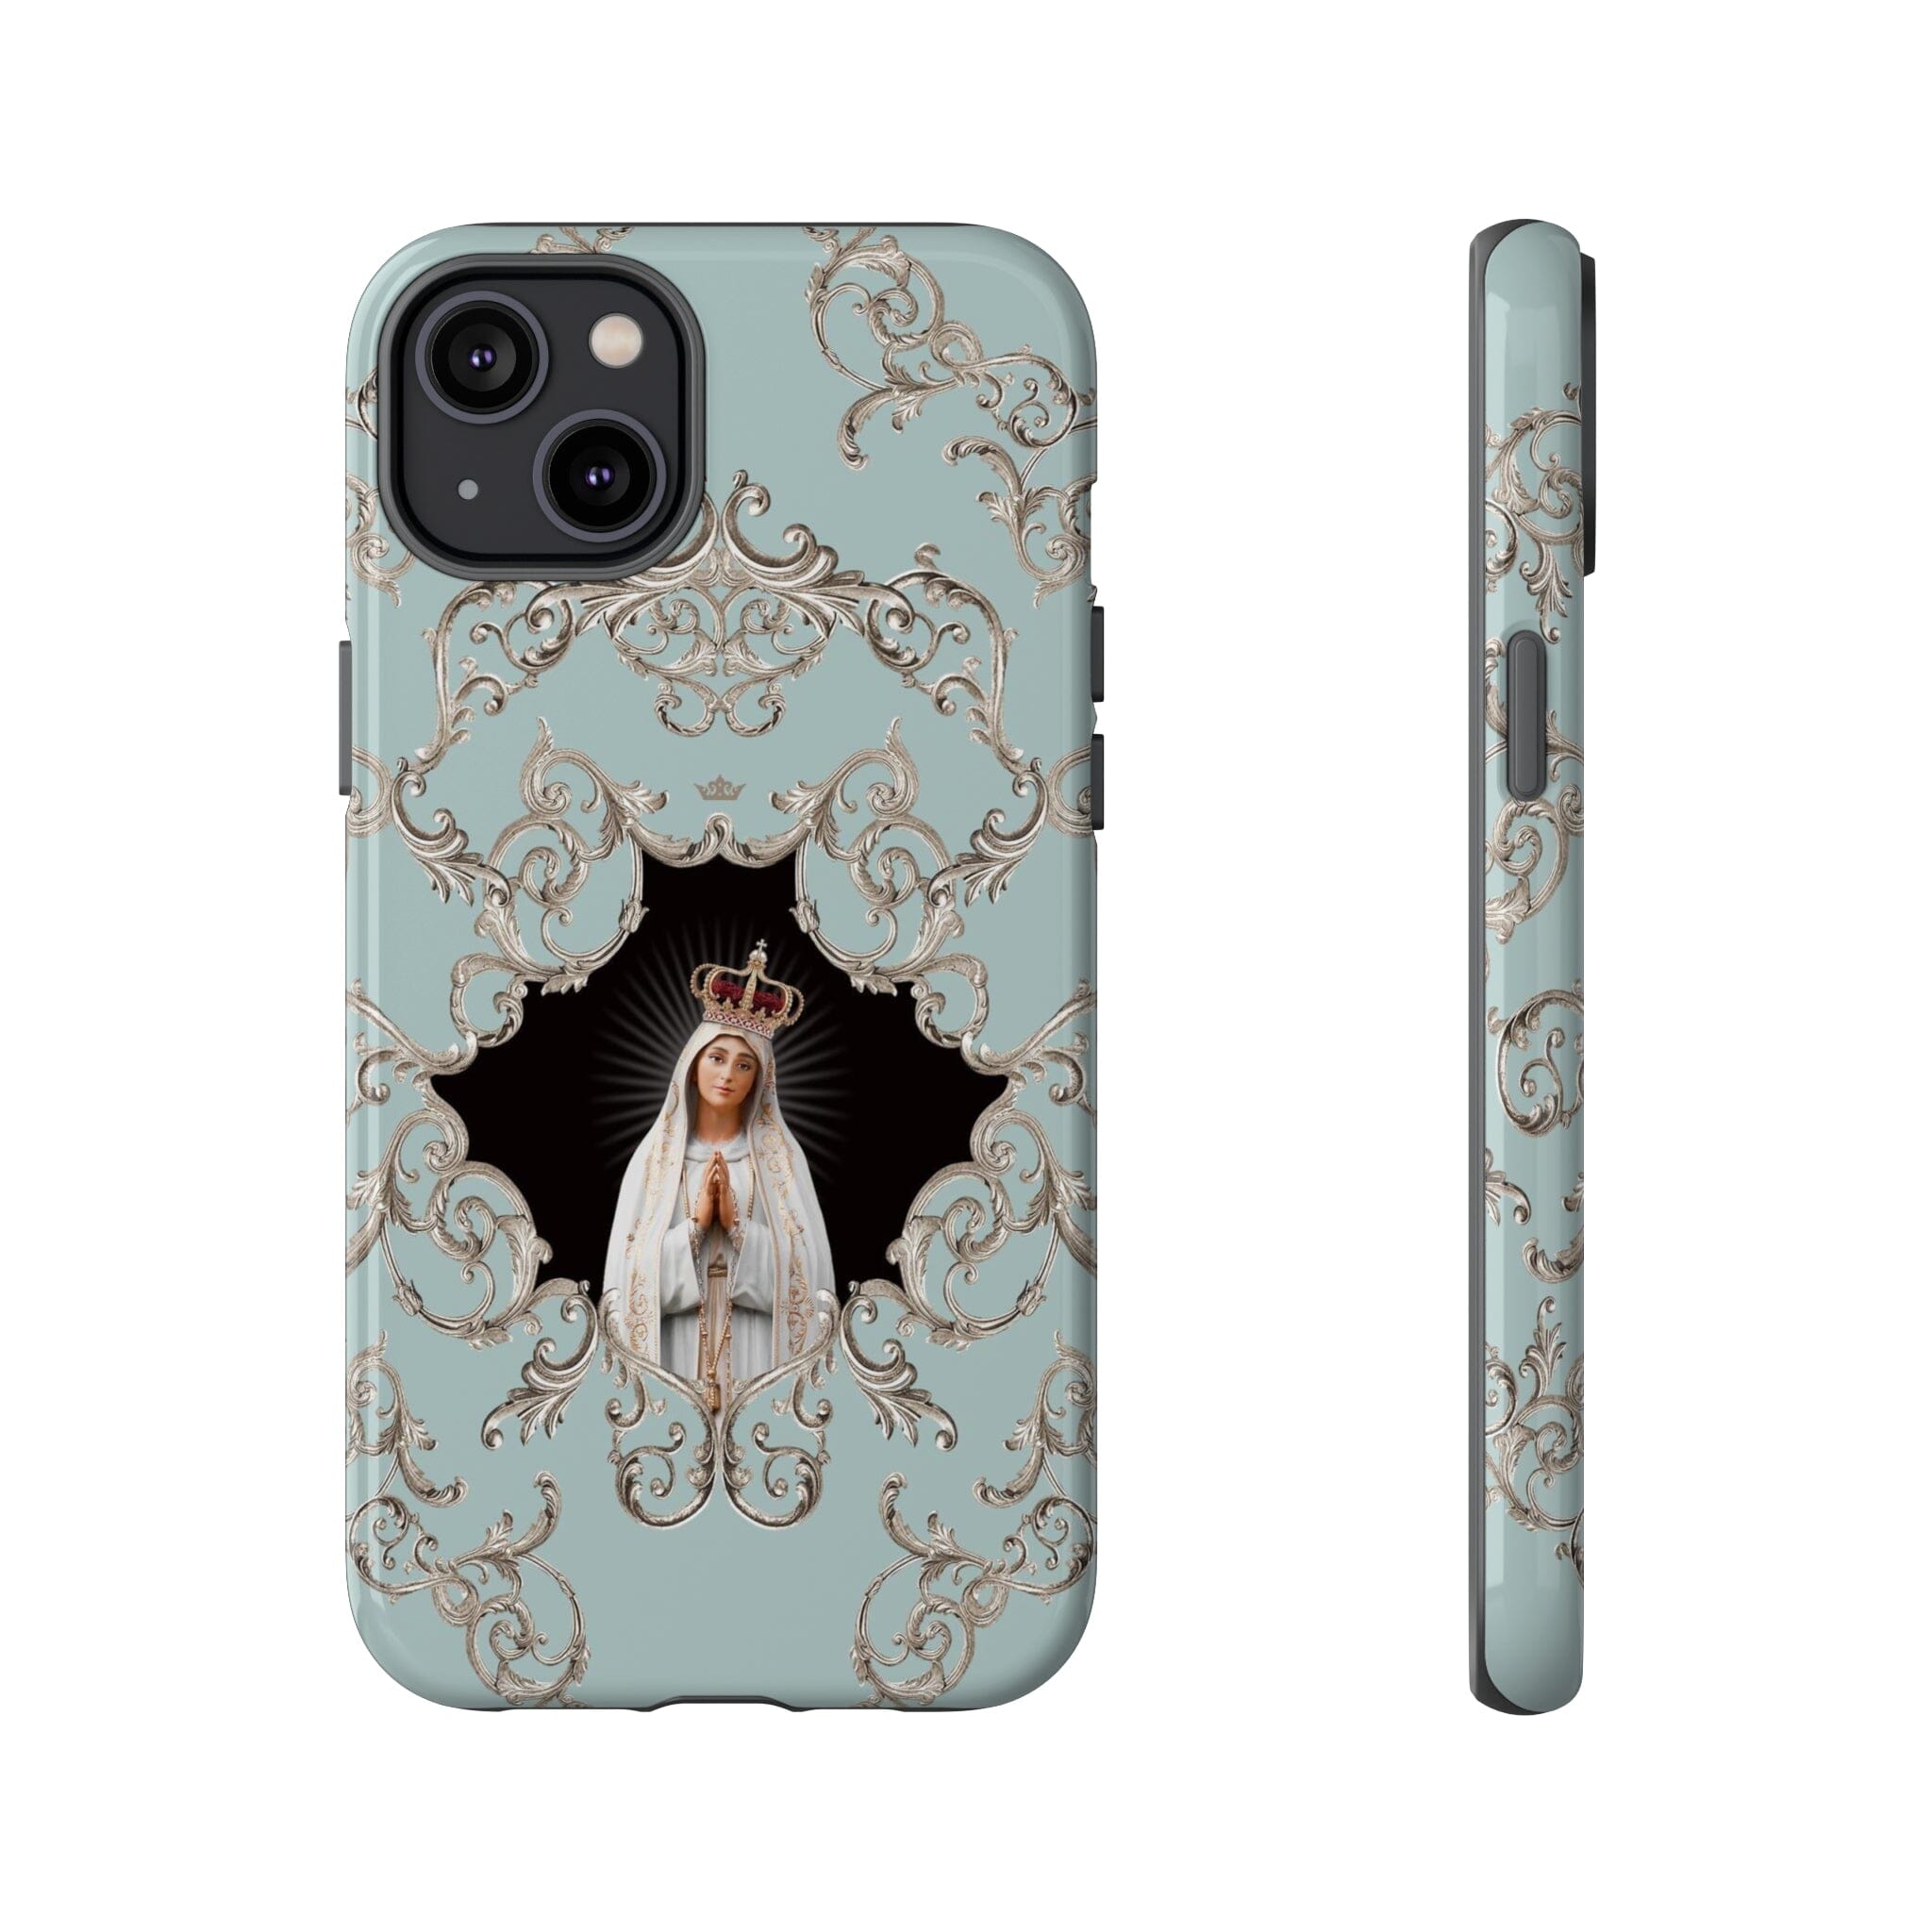 Our Lady of Fatima Hard Phone Case (Baroque Blue)